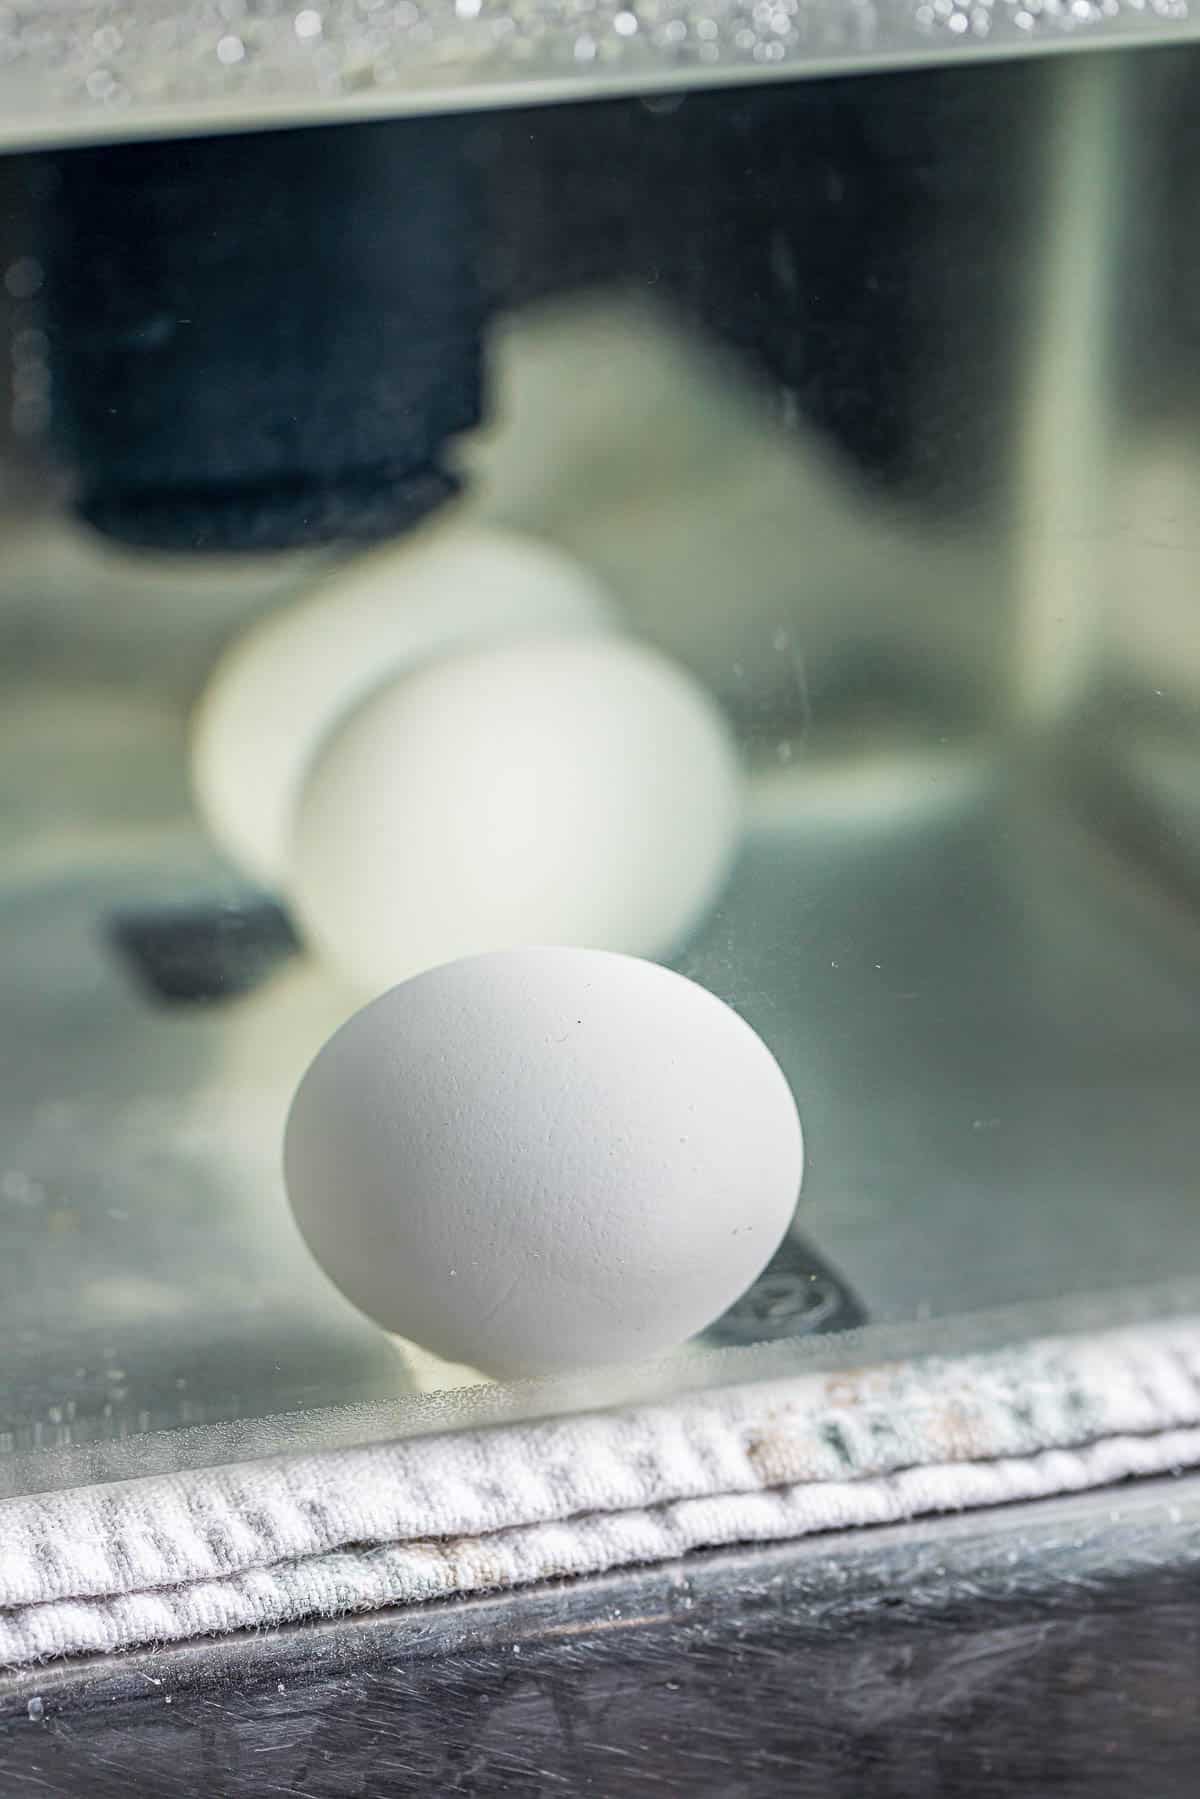 eggs floating in a container of water